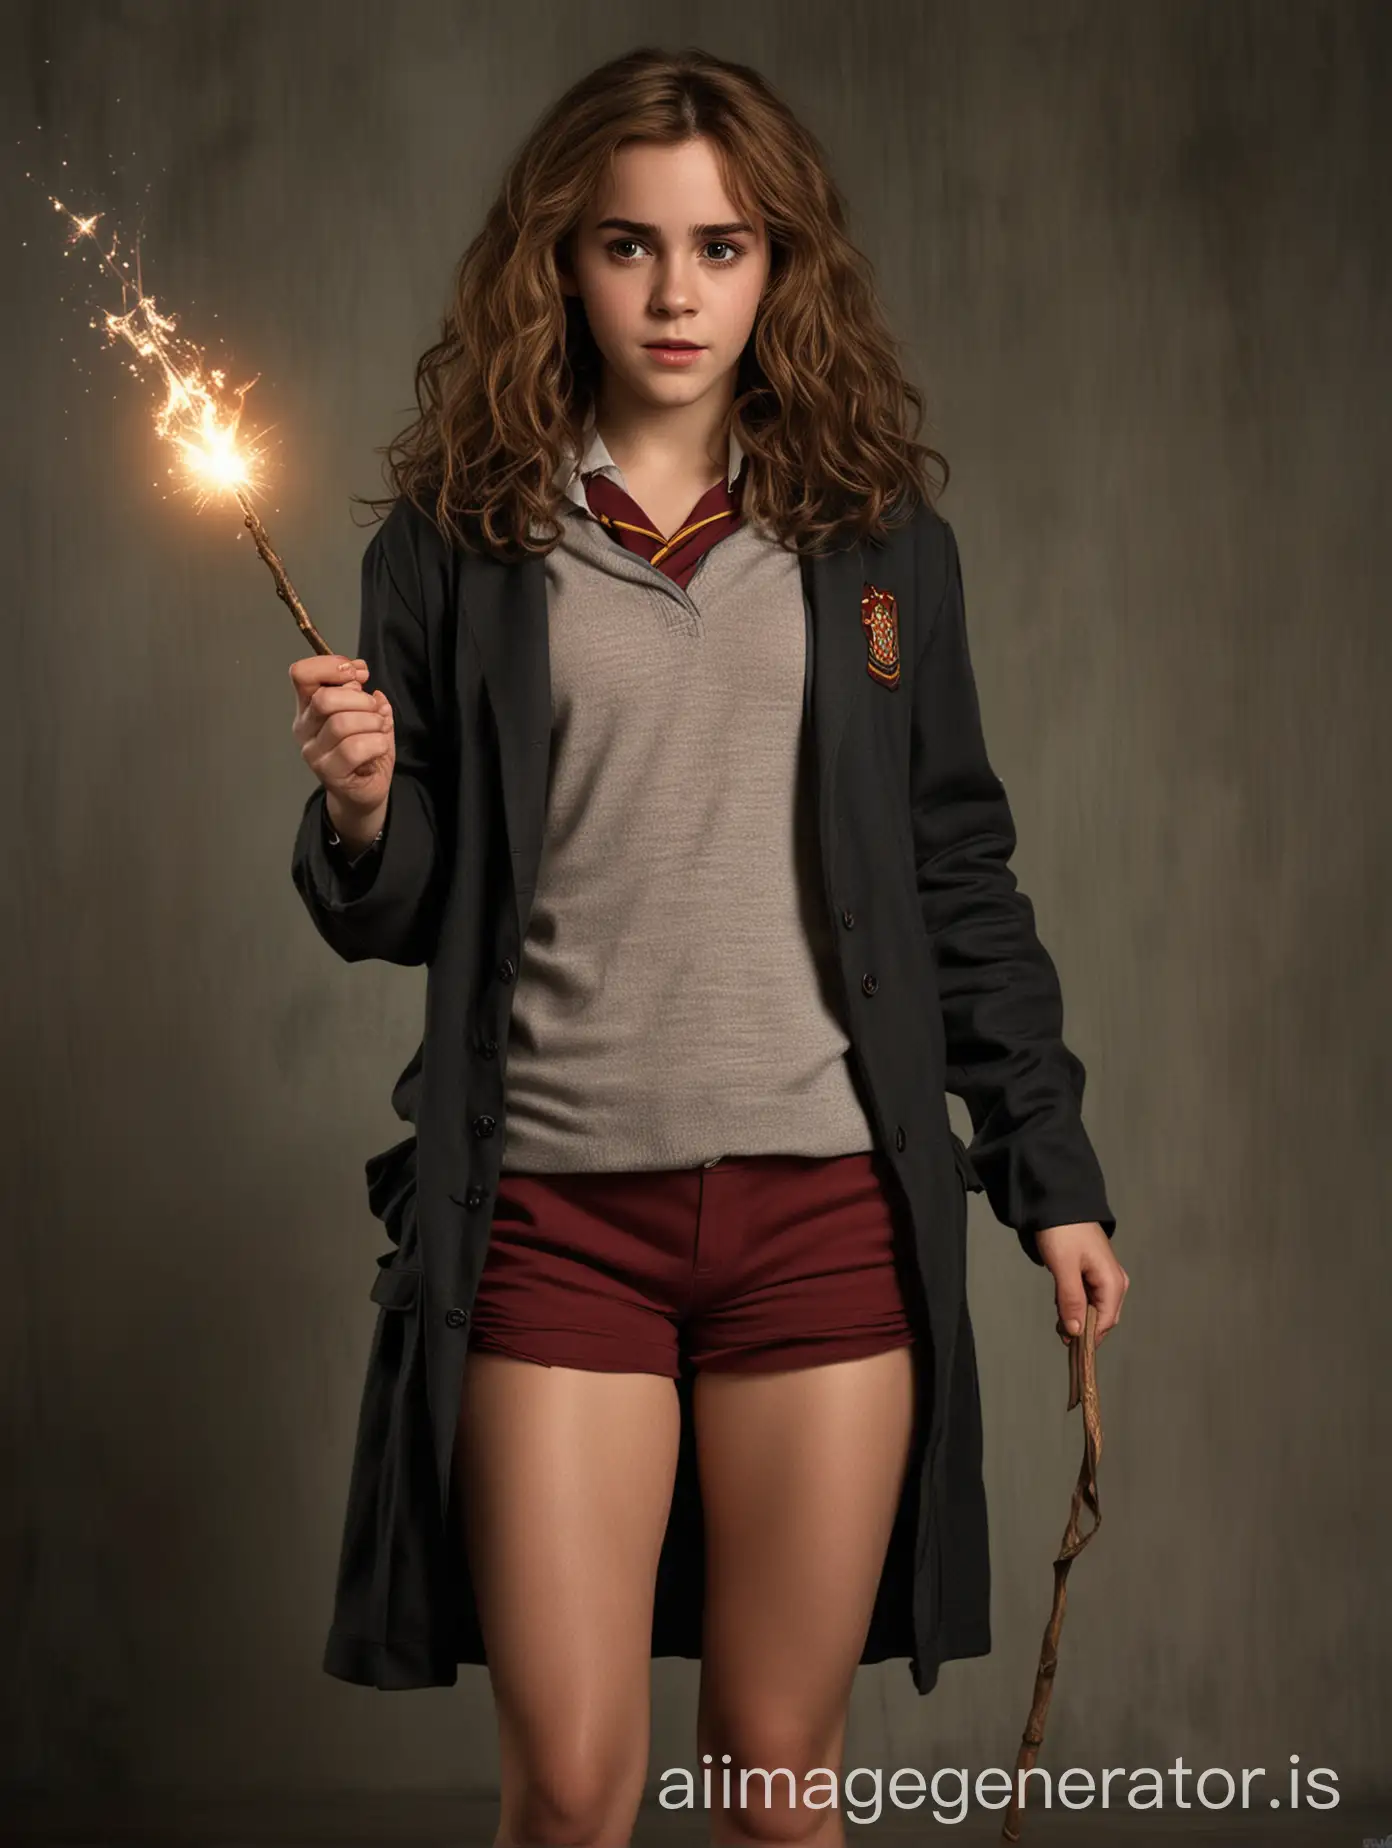 Hermione Granger with a magic wand disenchanted all her clothes except her panties